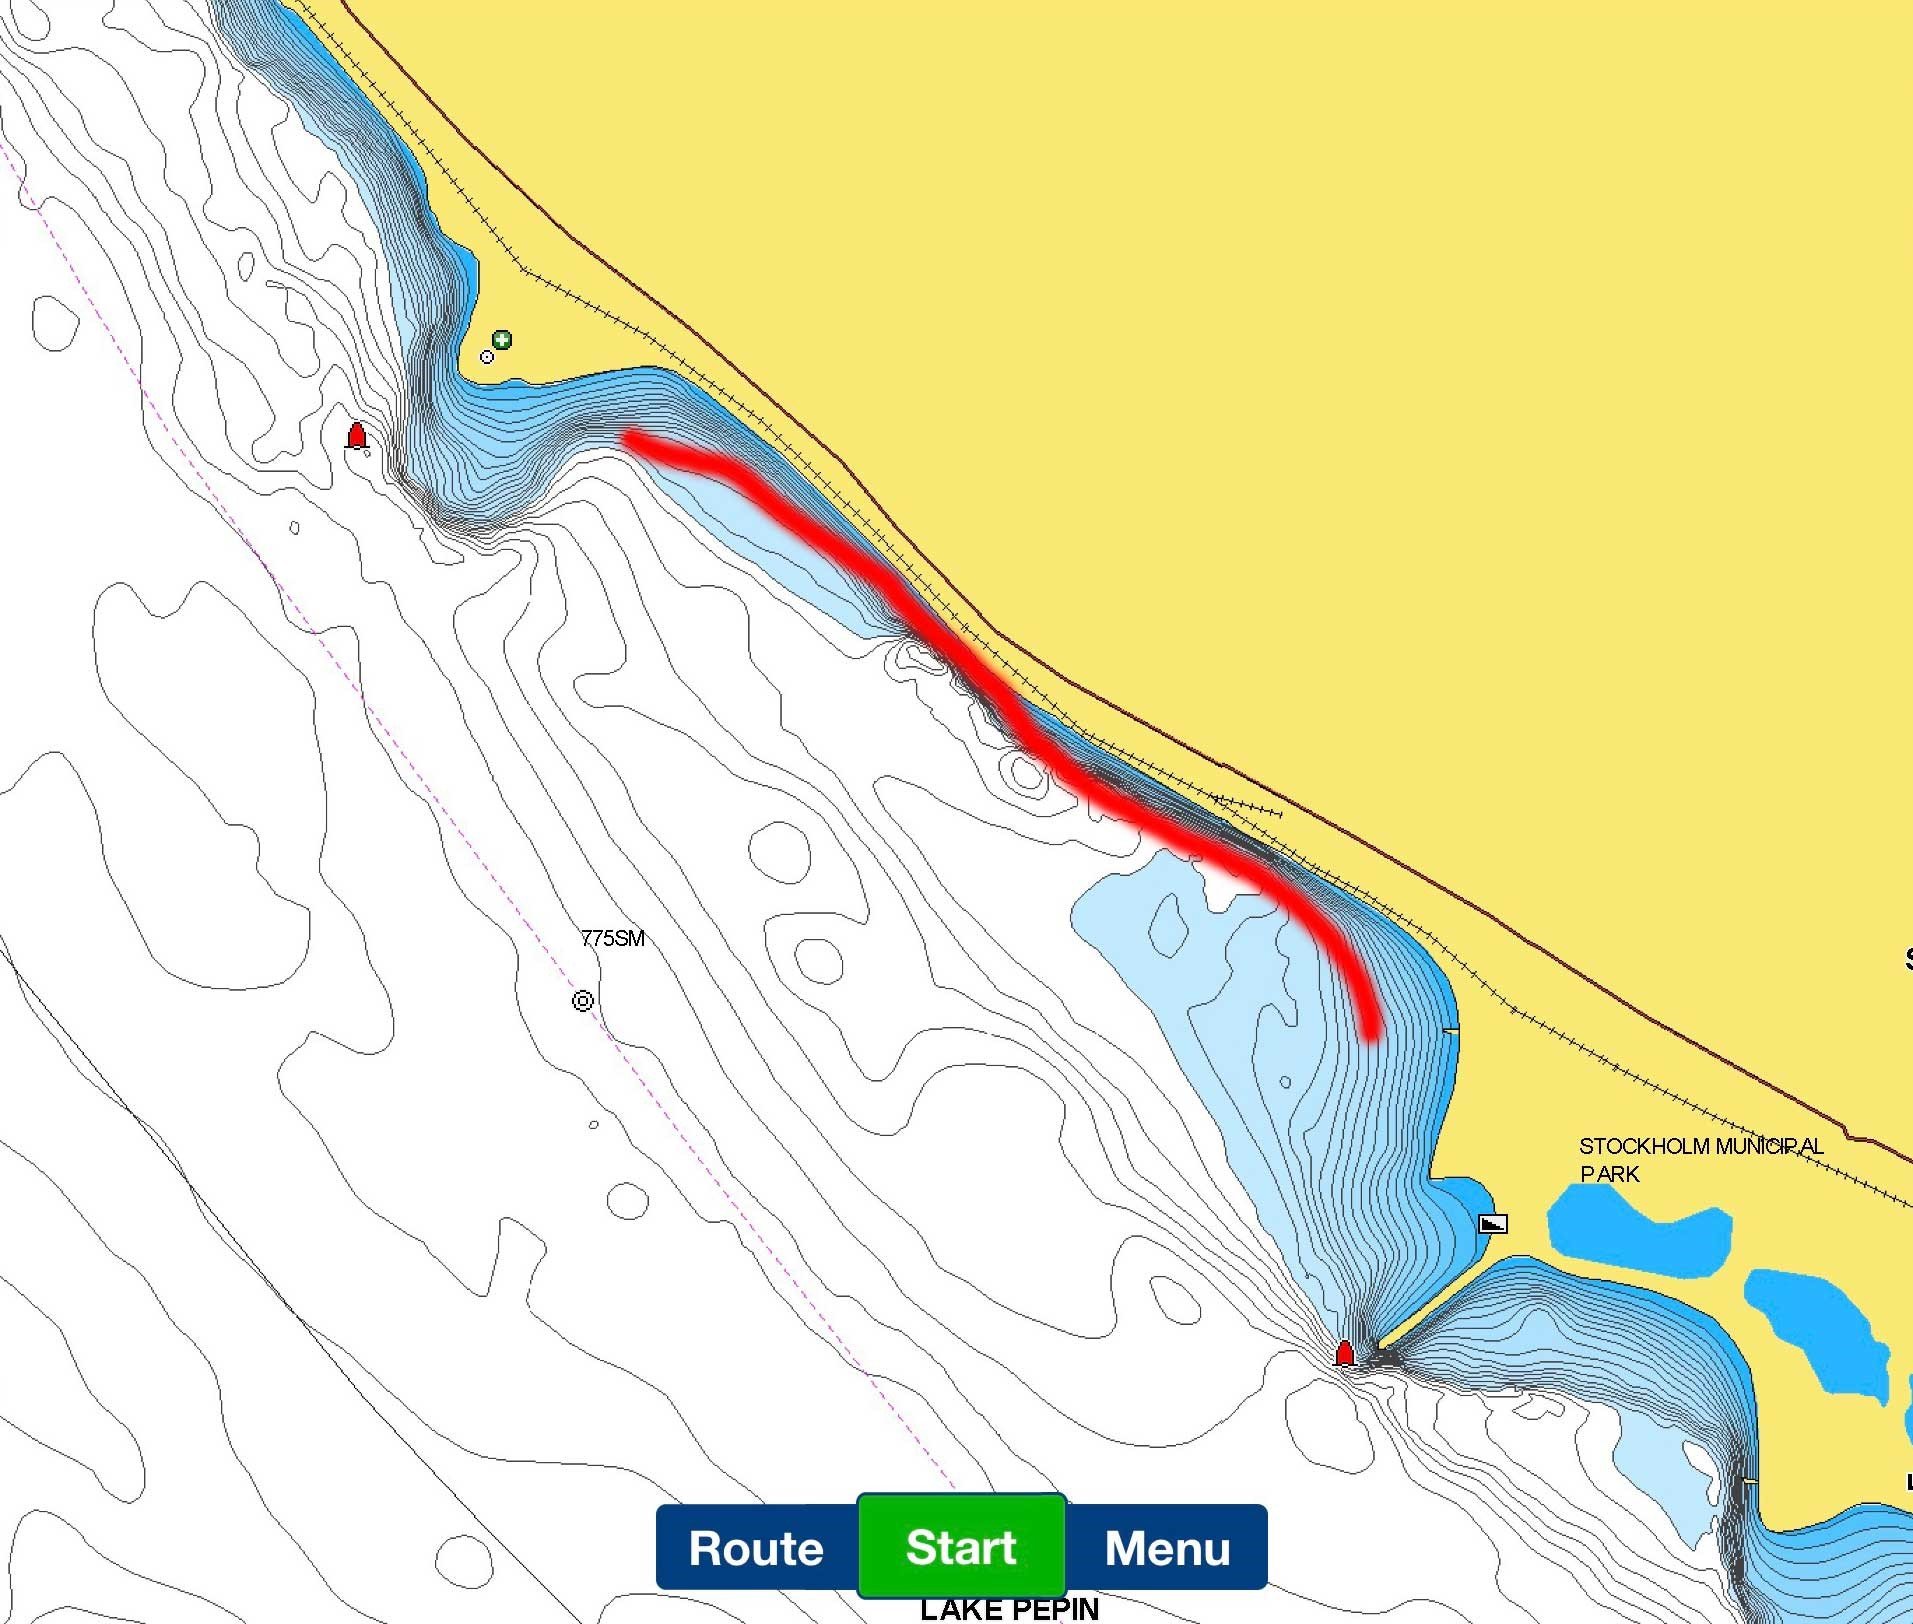 Shoreline section of Lake Pepin near Stockholm marked on a lake map.